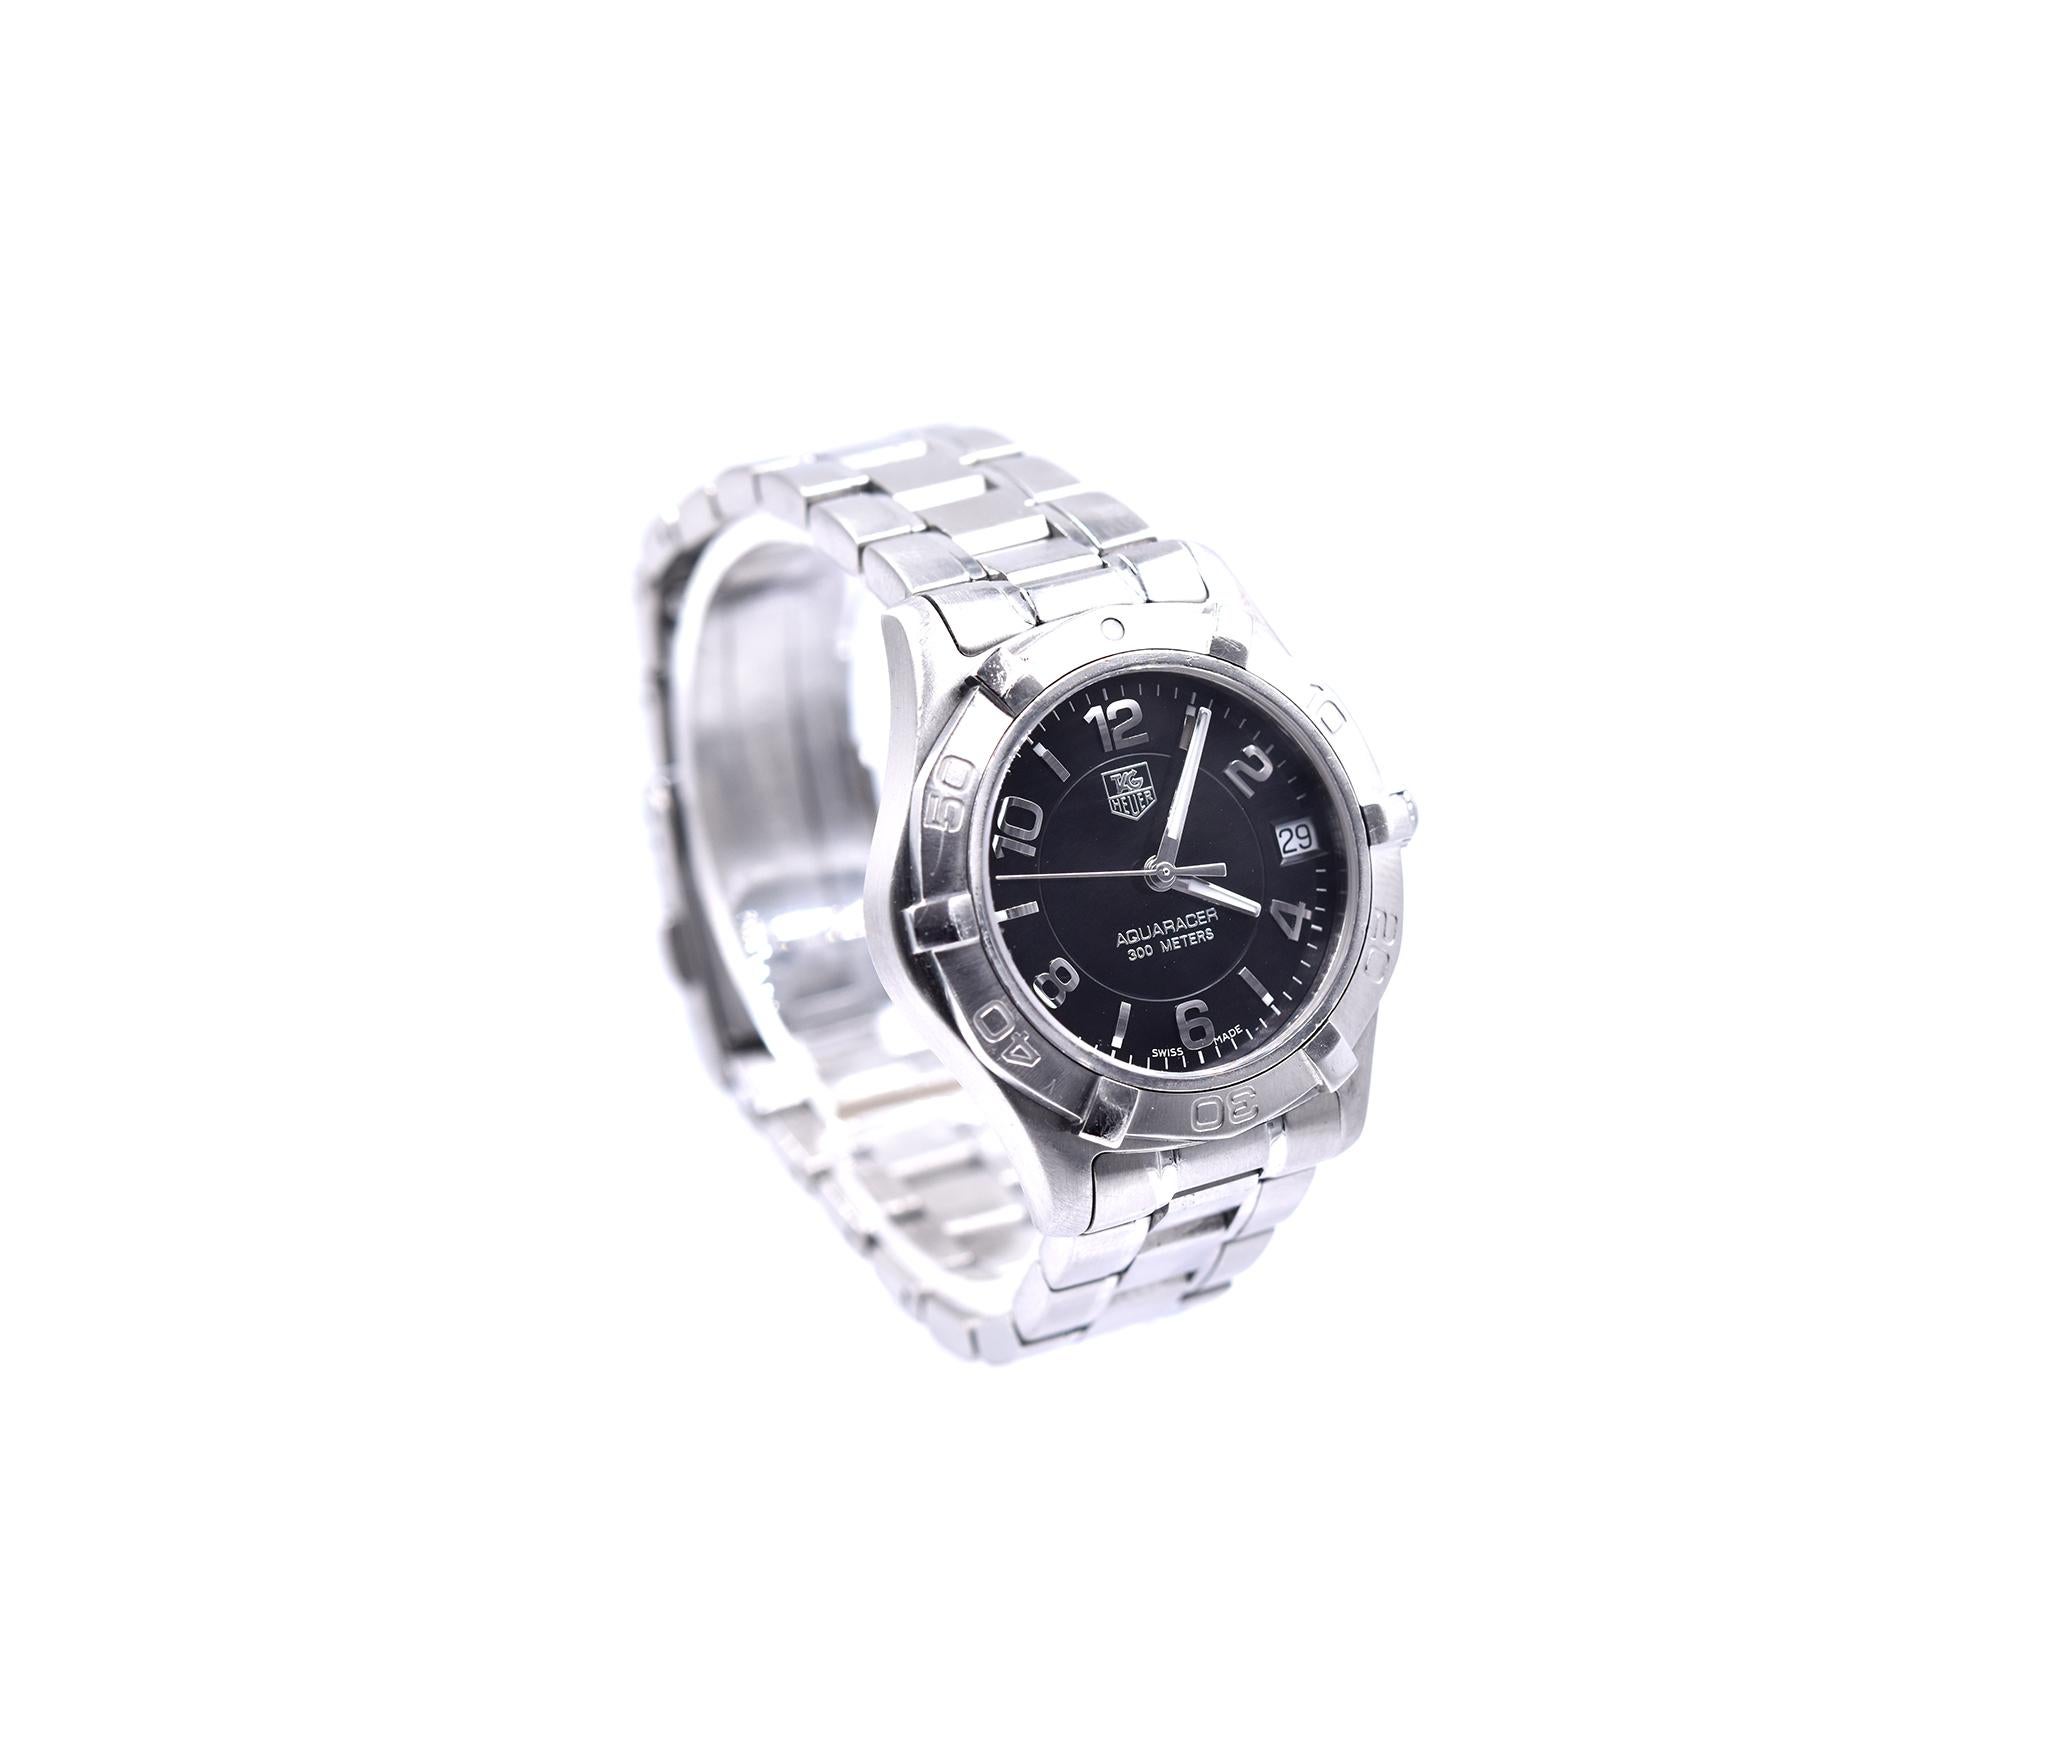 Function: hours, minutes, seconds, date
Case: 32mm stainless steel case, sapphire crystal, push/pull crown, rotating bezel
Dial: black dial, sub seconds, luminescent hands
Band: Tag Heuer stainless steel bracelet with deployment clasp
Serial#: